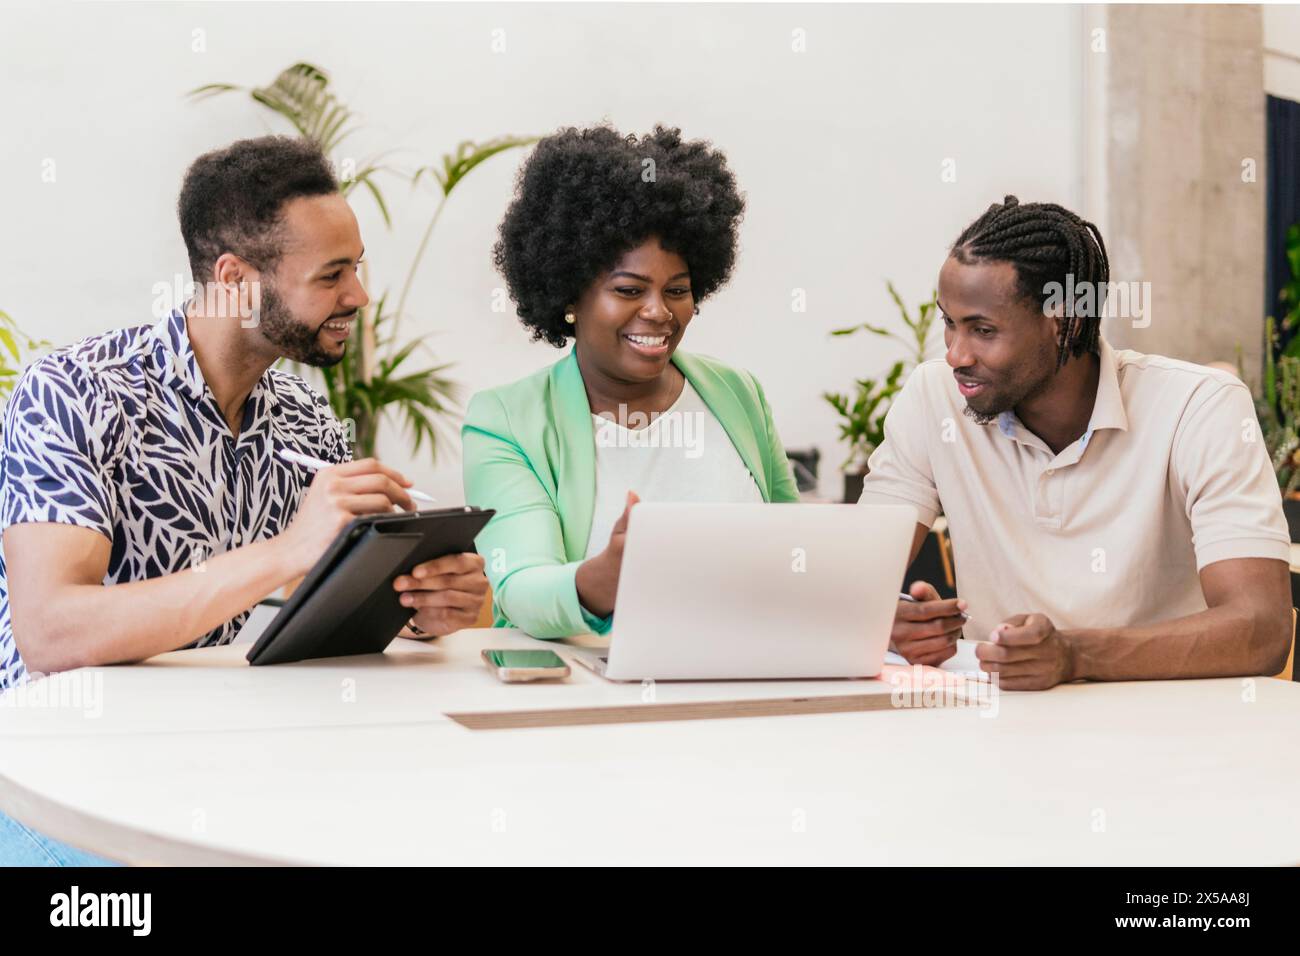 Three professionals engage in collaborative work at a bright coworking space, sharing ideas and resources on a laptop and digital tablet Stock Photo